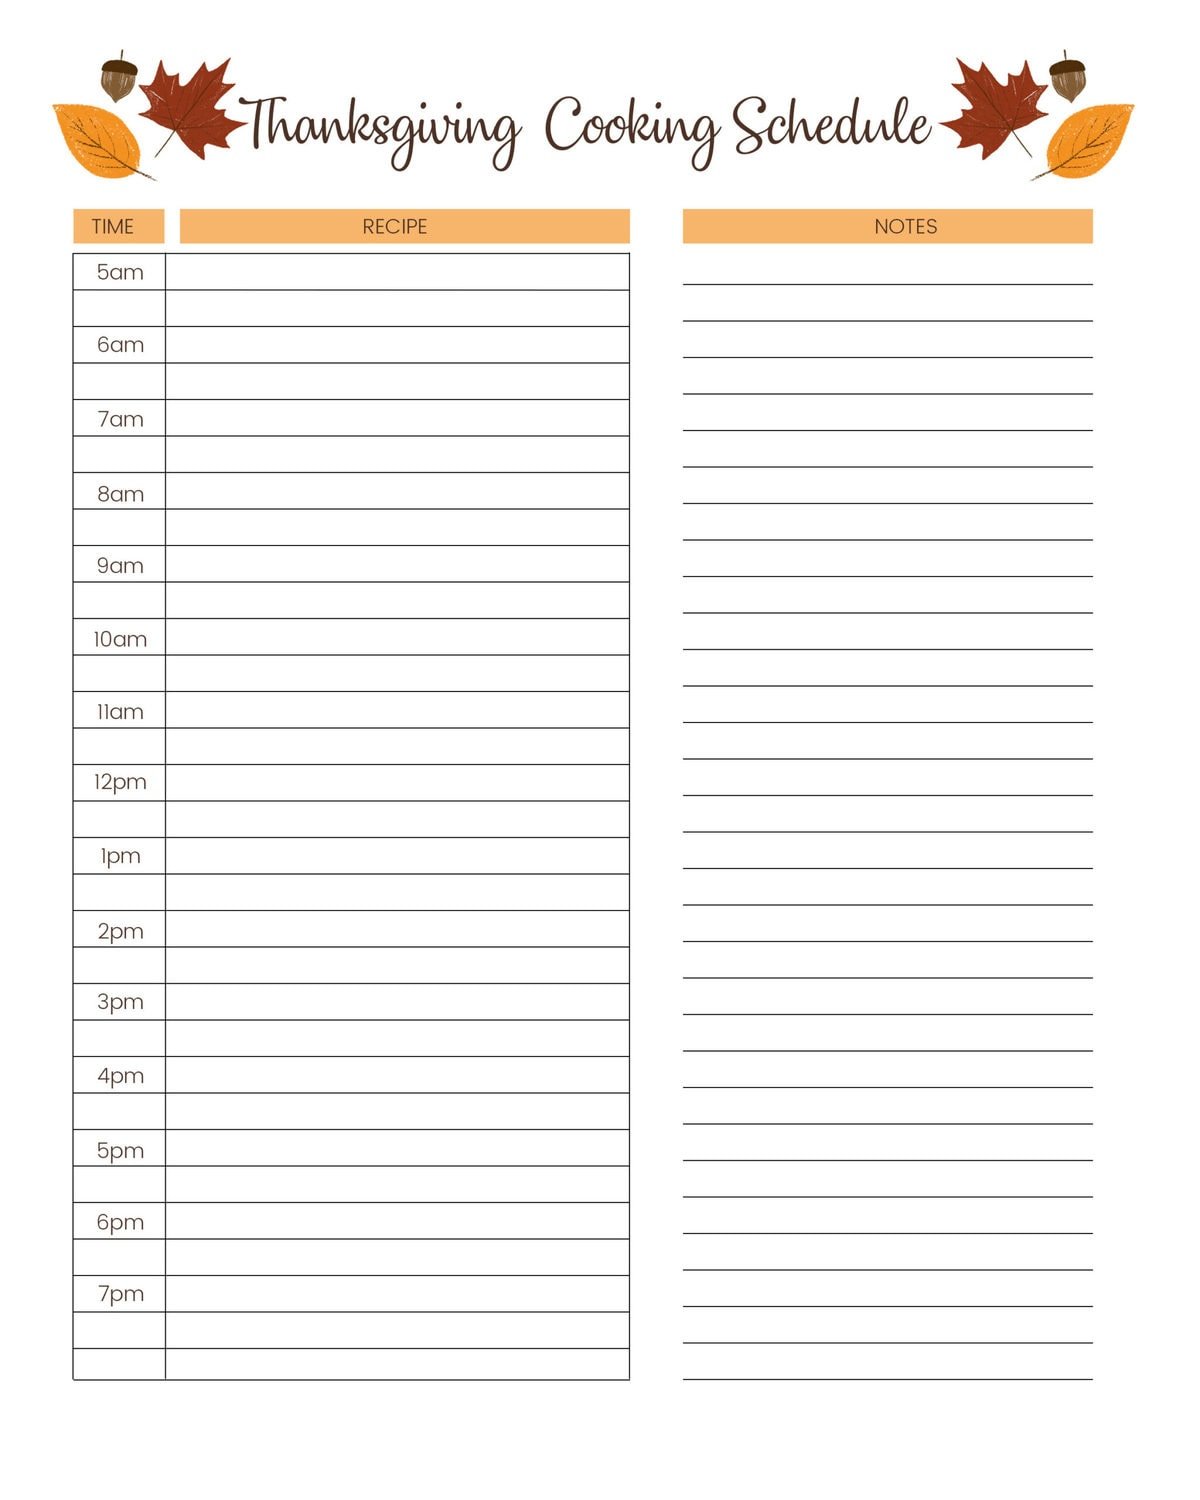 Thanksgiving Cooking Schedule template